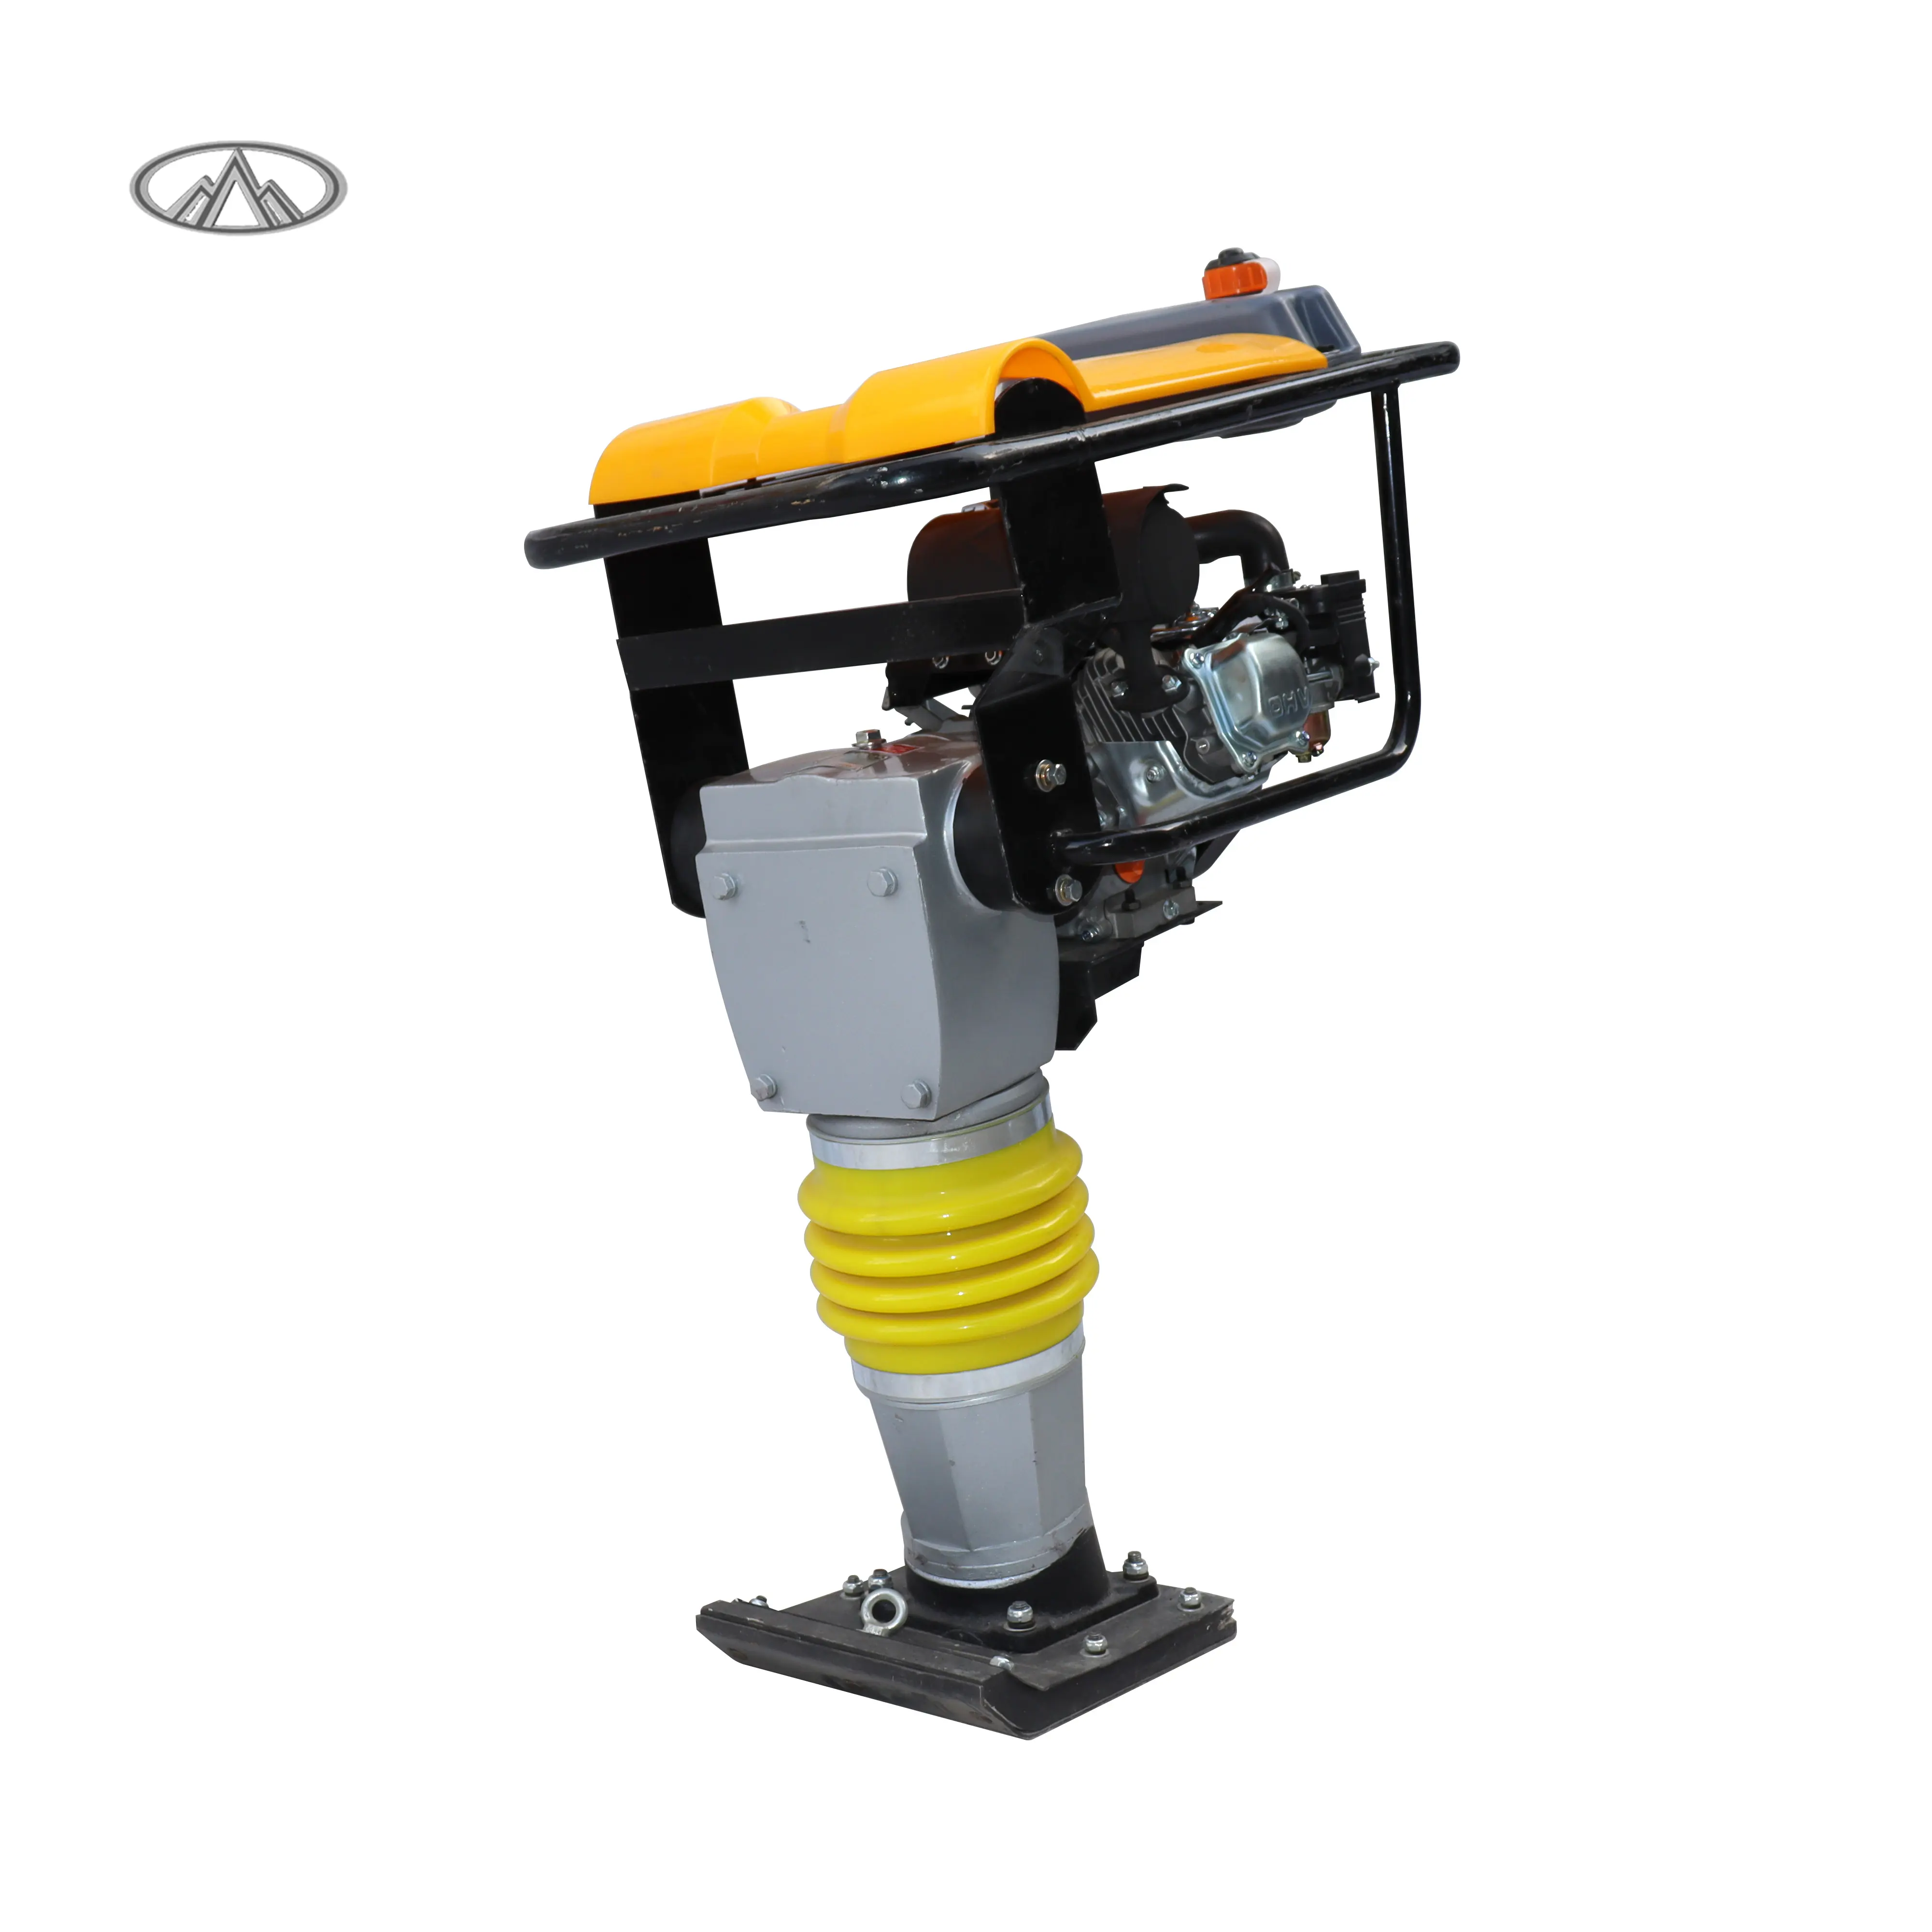 Engineering Power Handheld Type95 Tamping Rammer Machine Gasoline One Year Quality Assurance Buy With Confidence